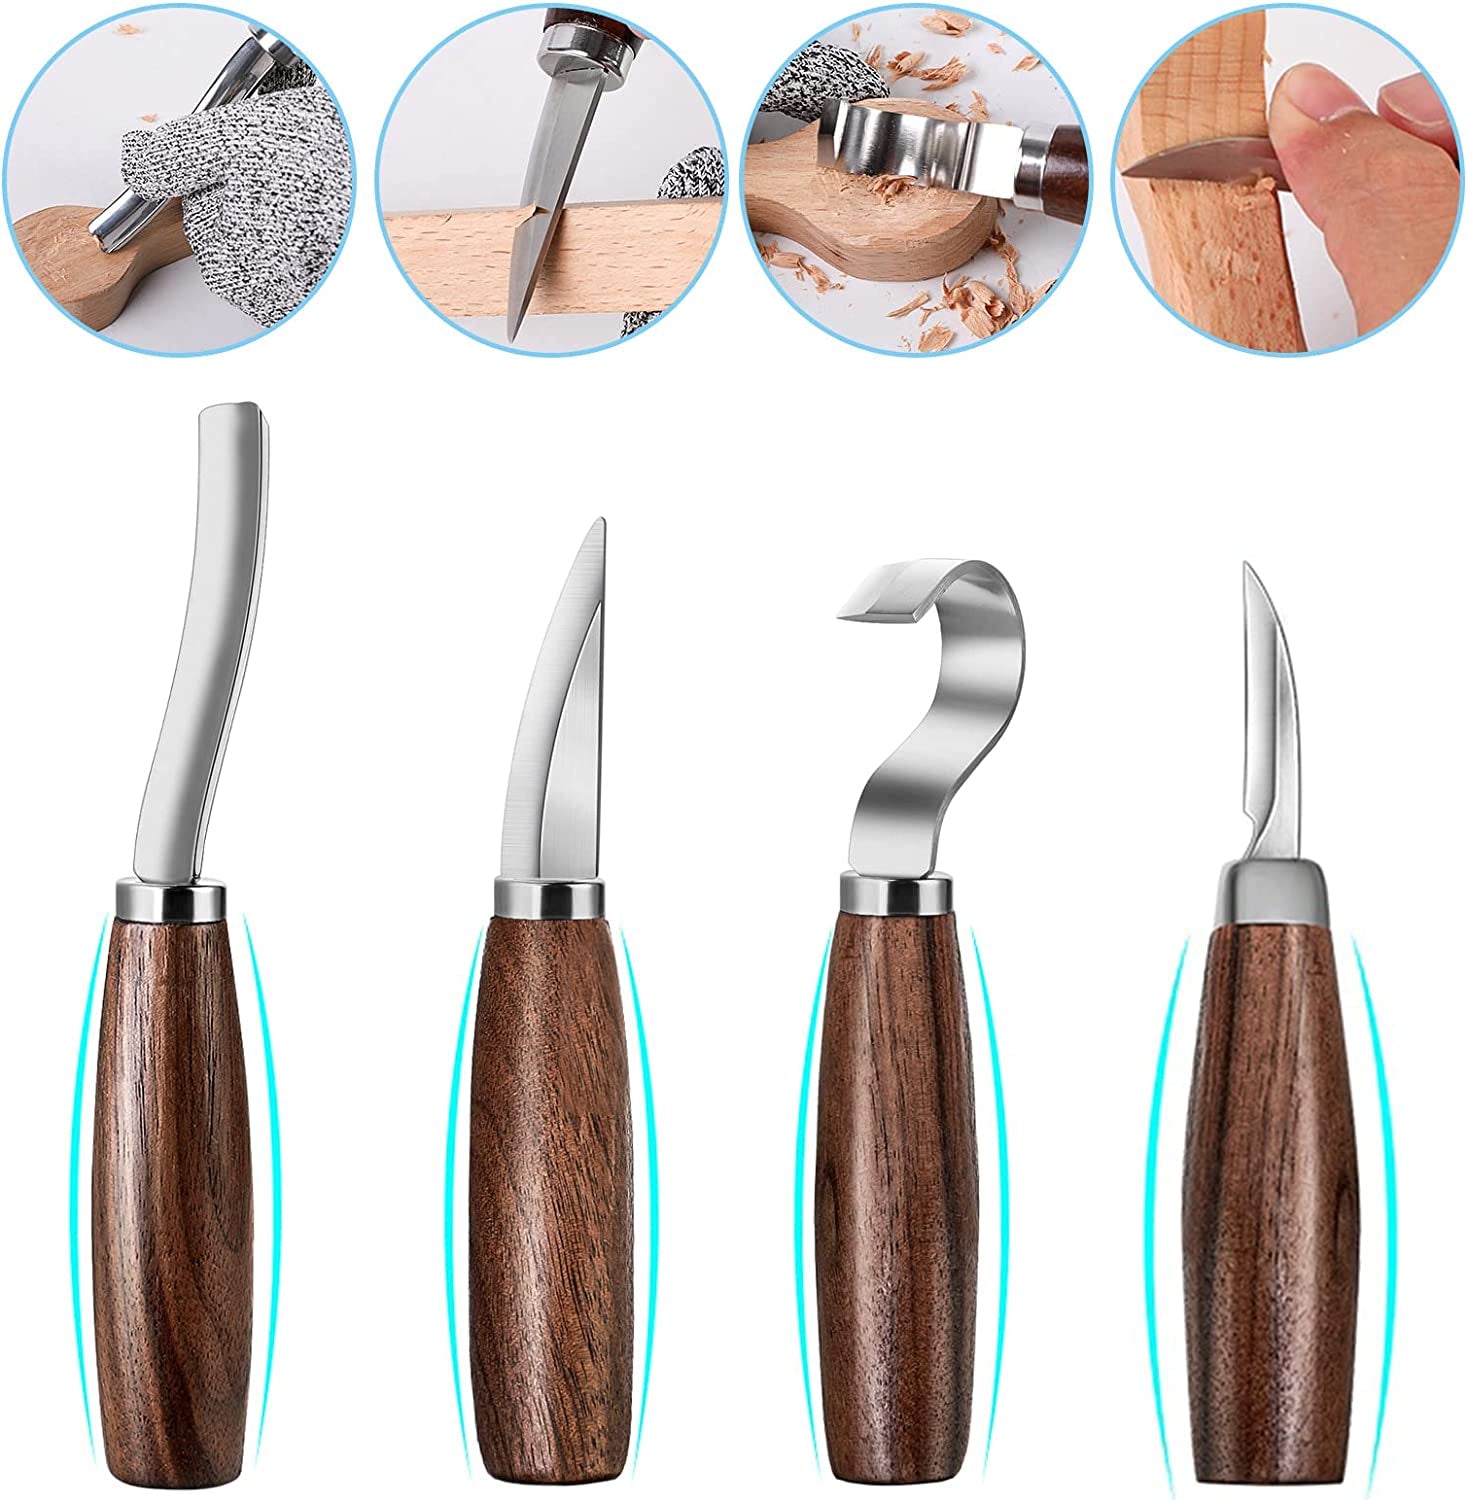 Wood Carving Tools Set,Detail and Hook Carving Knife Kit for Beginners,Trimming Knife for Spoon Bowl Cup Woodwork,Round Handle Design and 6Pcs SK2 Carbon Steel Wood Carving Knives（10Pcs）